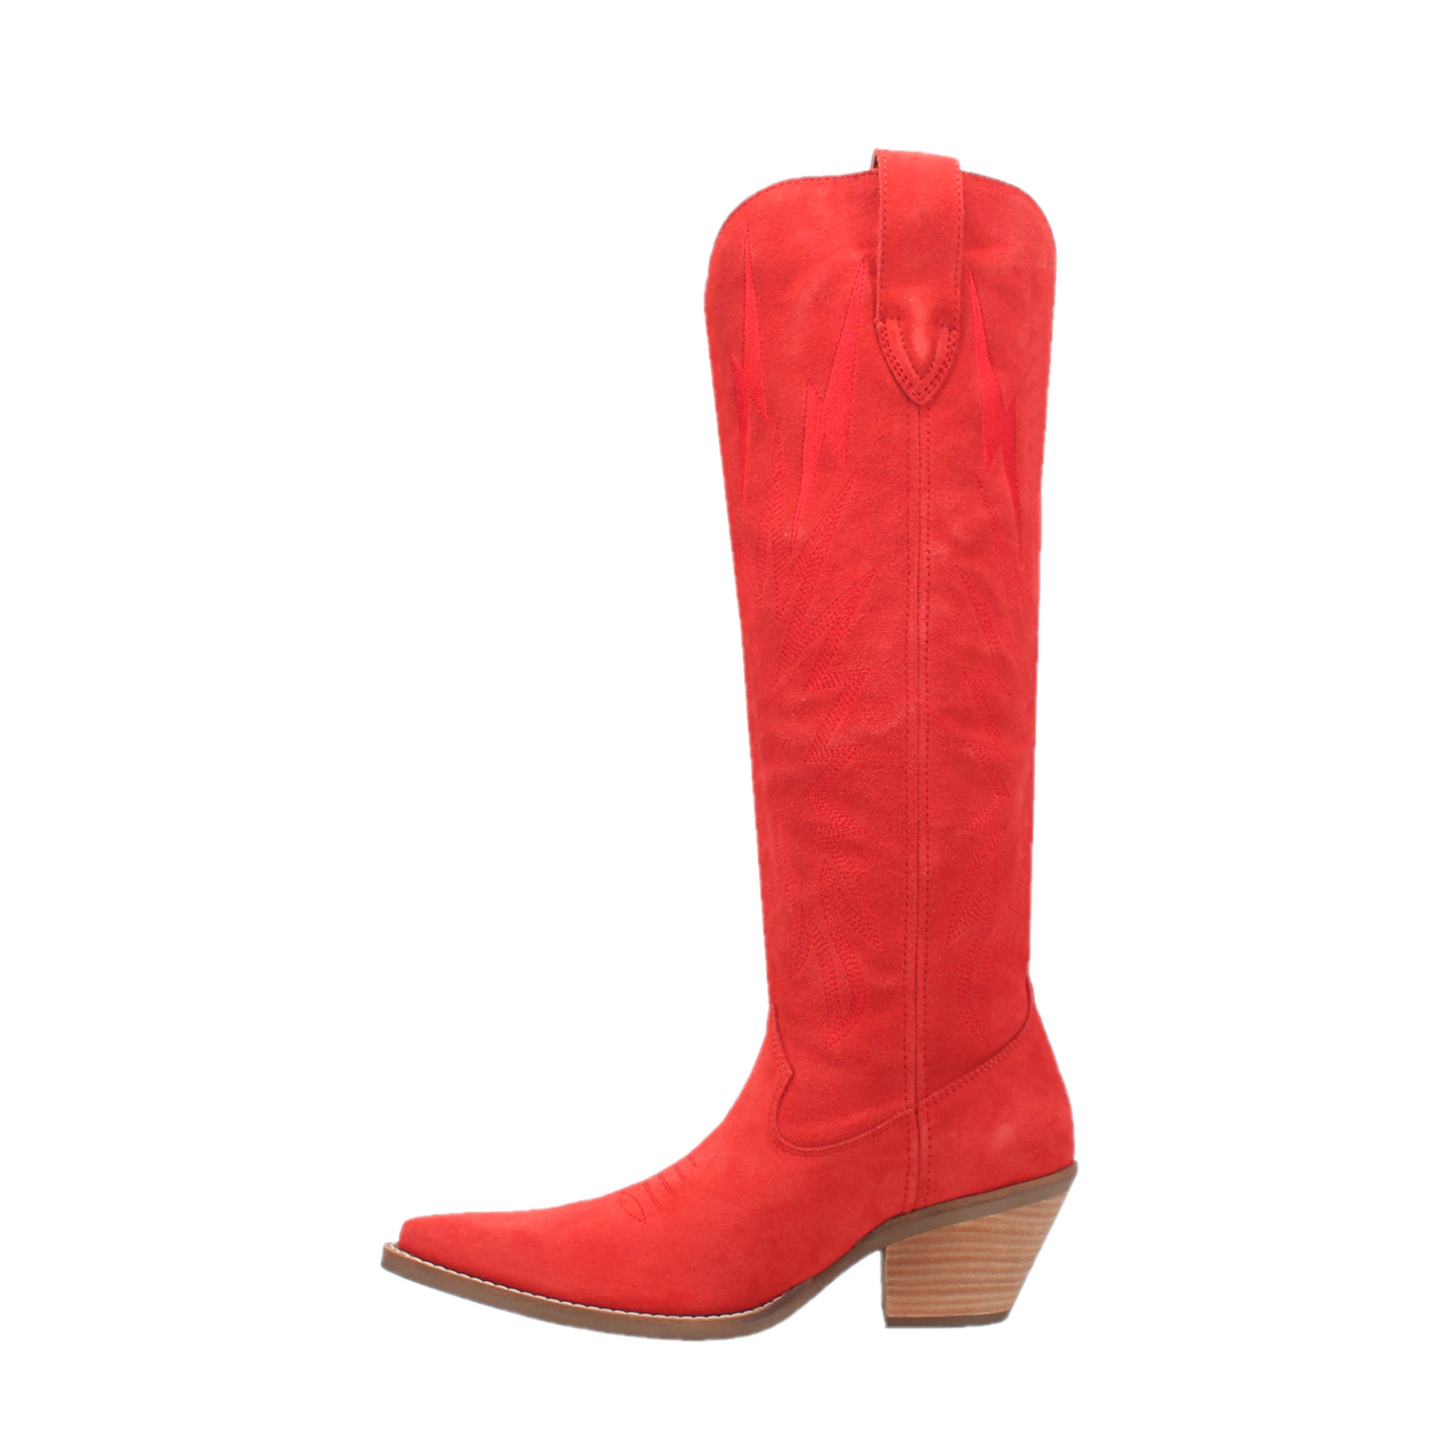 Dingo Ladies Thunder Road Red Tall Western Boots DI597-BK